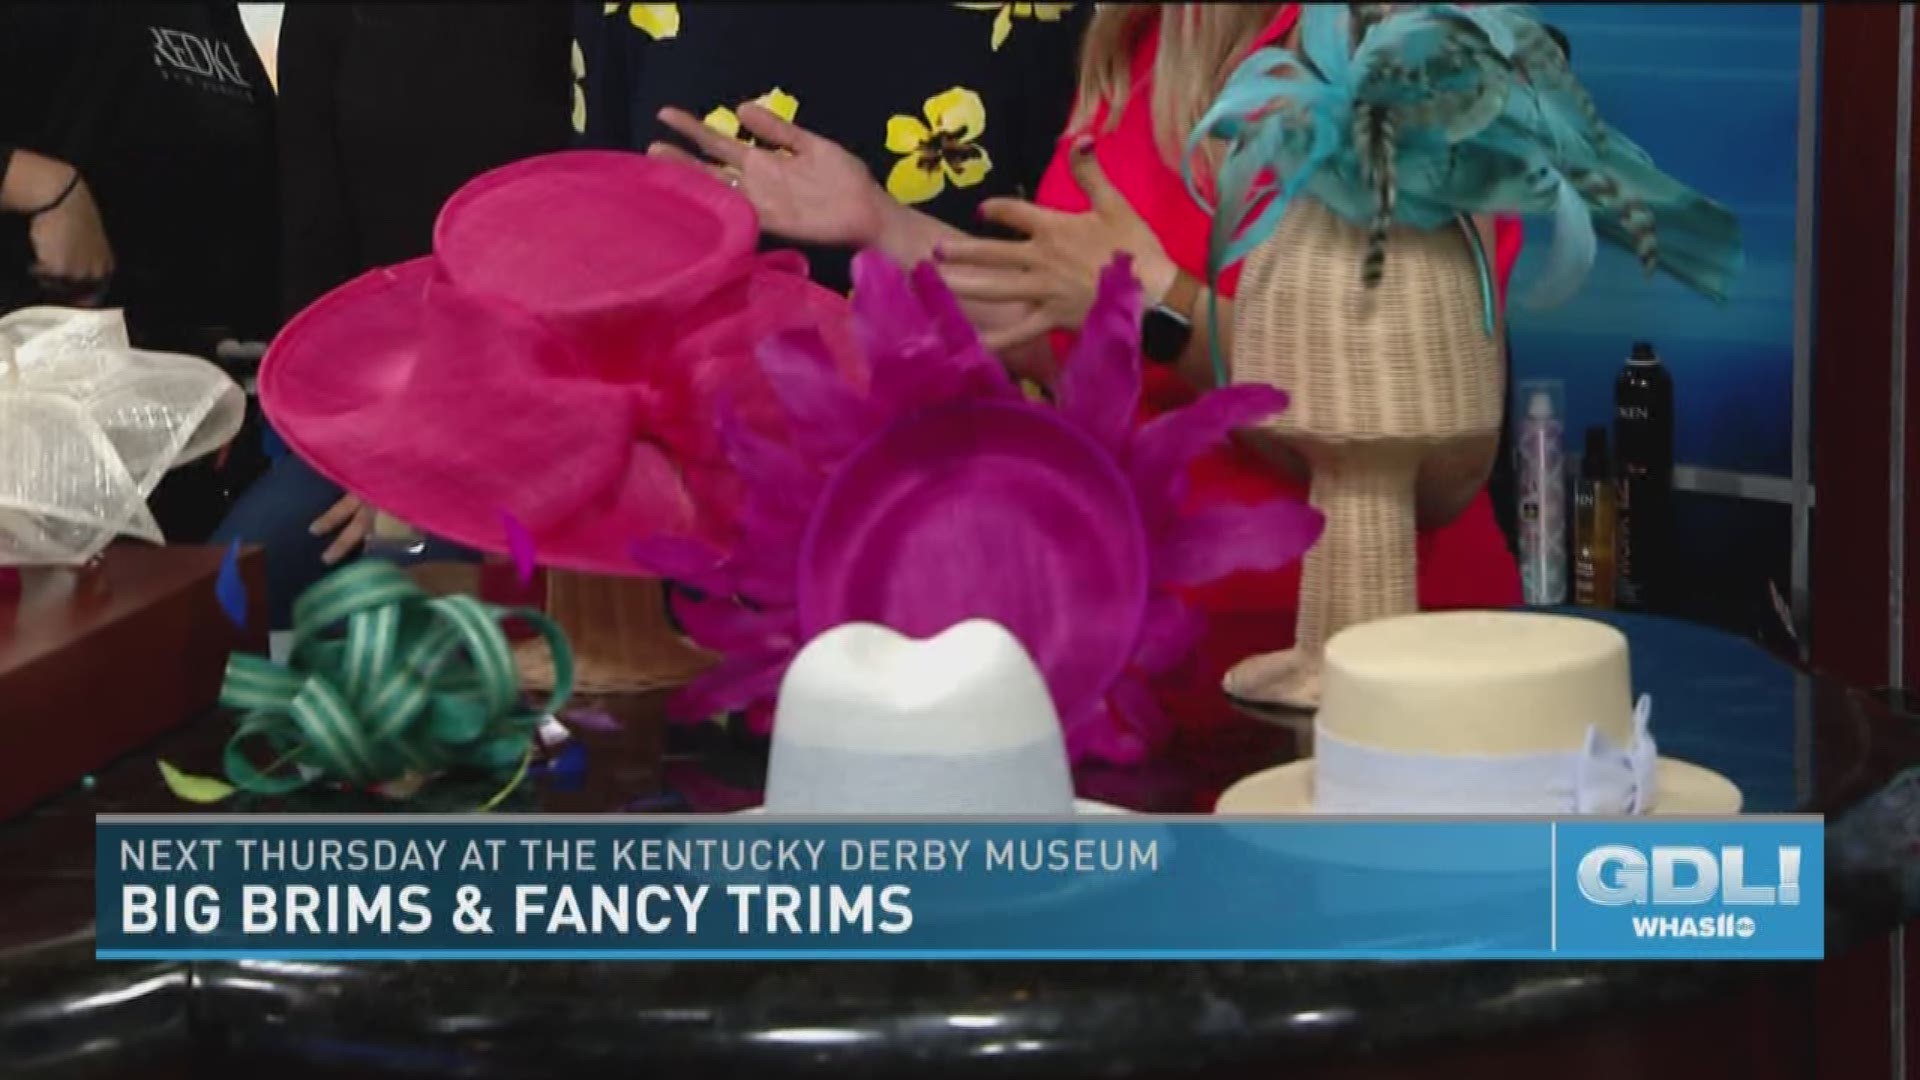 Big Brims and Fancy Trims is Thursday, April 4, 2019 at the Kentucky Derby Museum. The hat sample sale starts at 5:30 PM, but they'll have popup shops and complimentary cocktails and hors d'oeuvres at 4:30 PM.